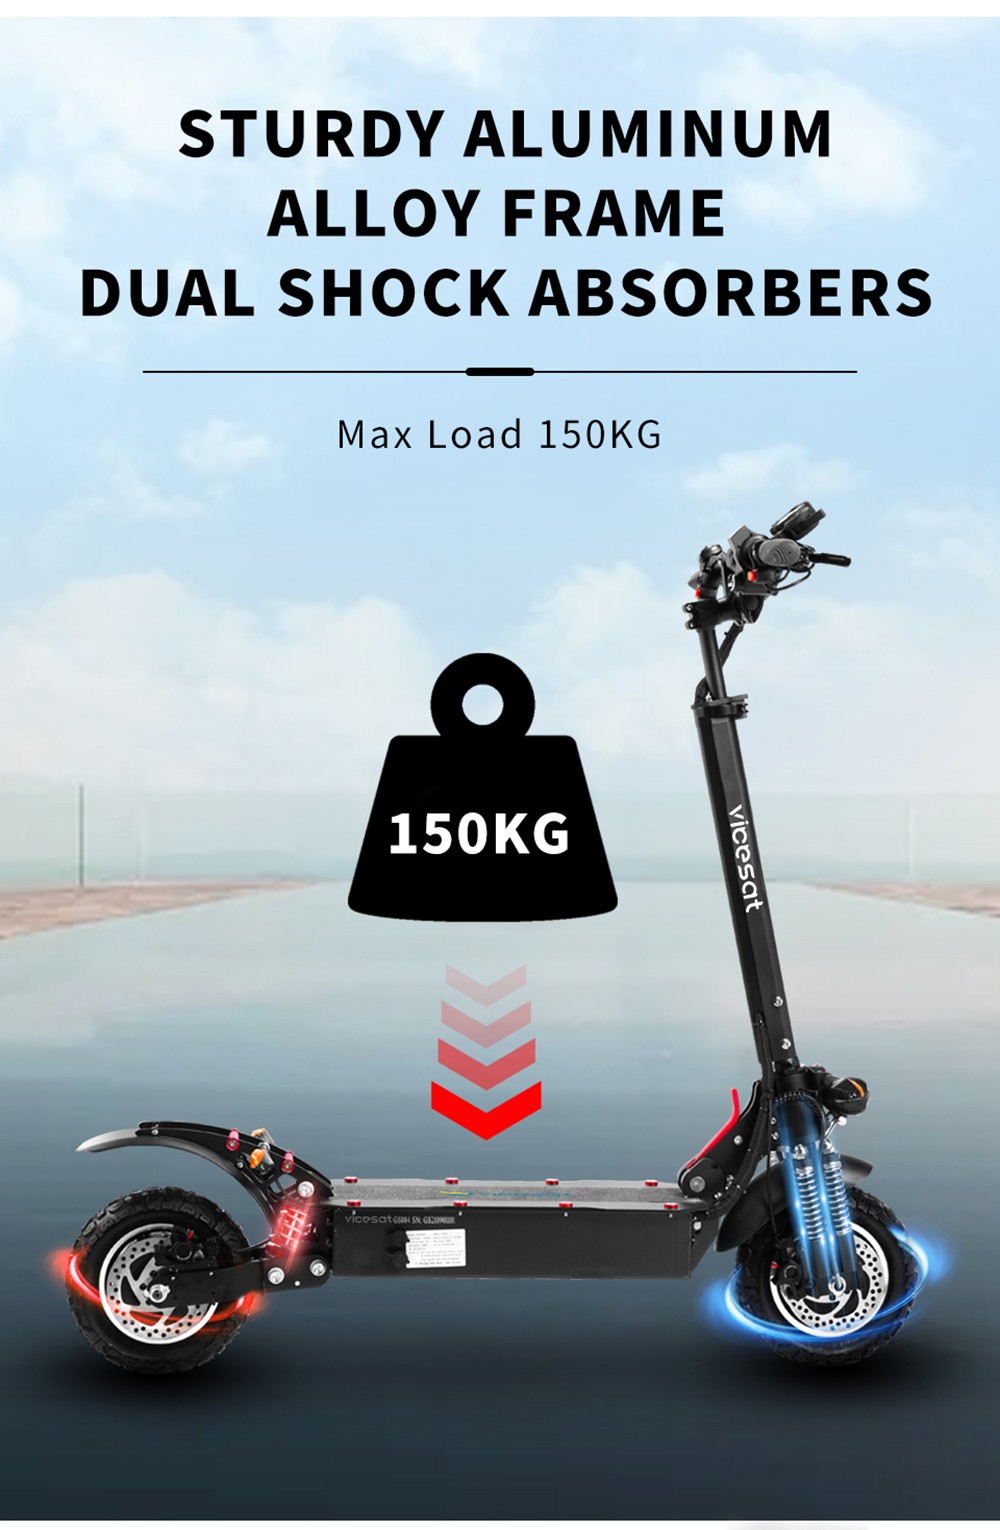 Vicesat VS04 Electric Scooter 2*1000W Motor 52V 24Ah Battery 65km/h Max Speed 60km Range without Seat